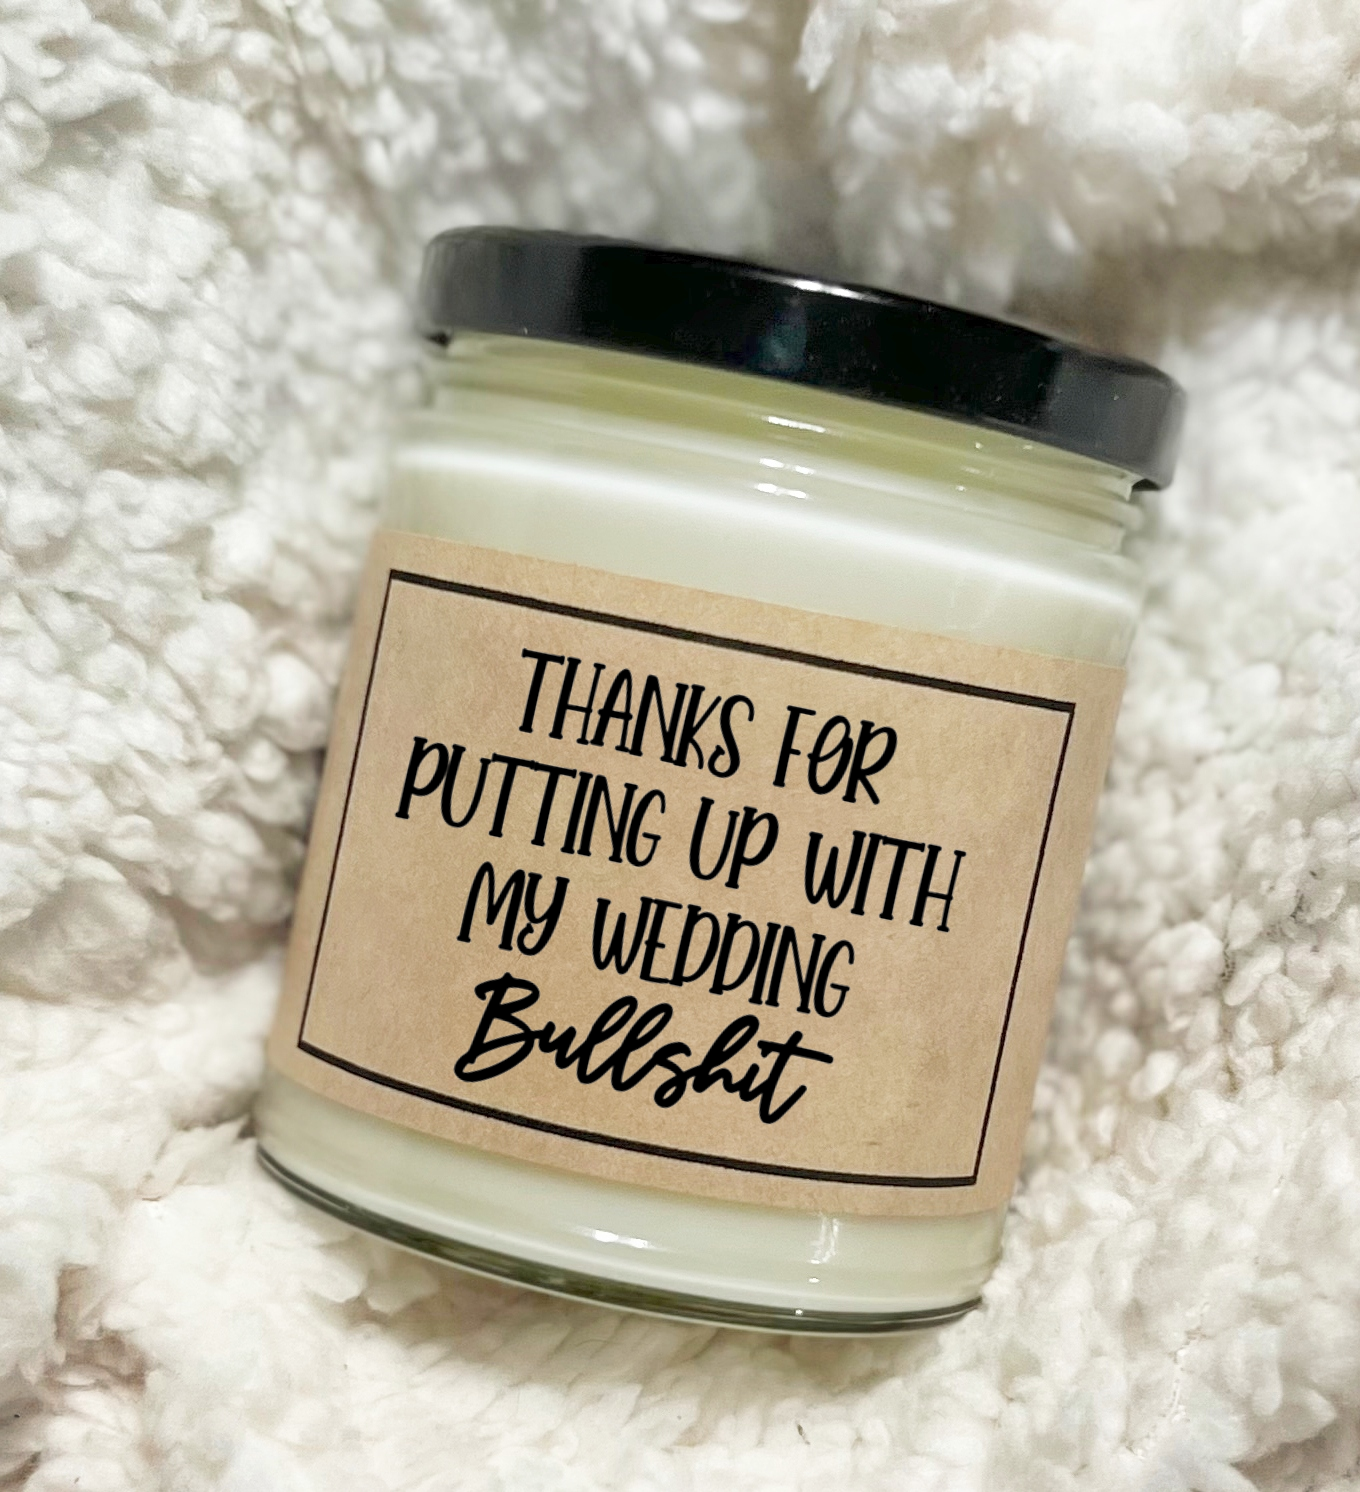 Thanks For Putting Up With My Wedding Bullshit - Custom Candle